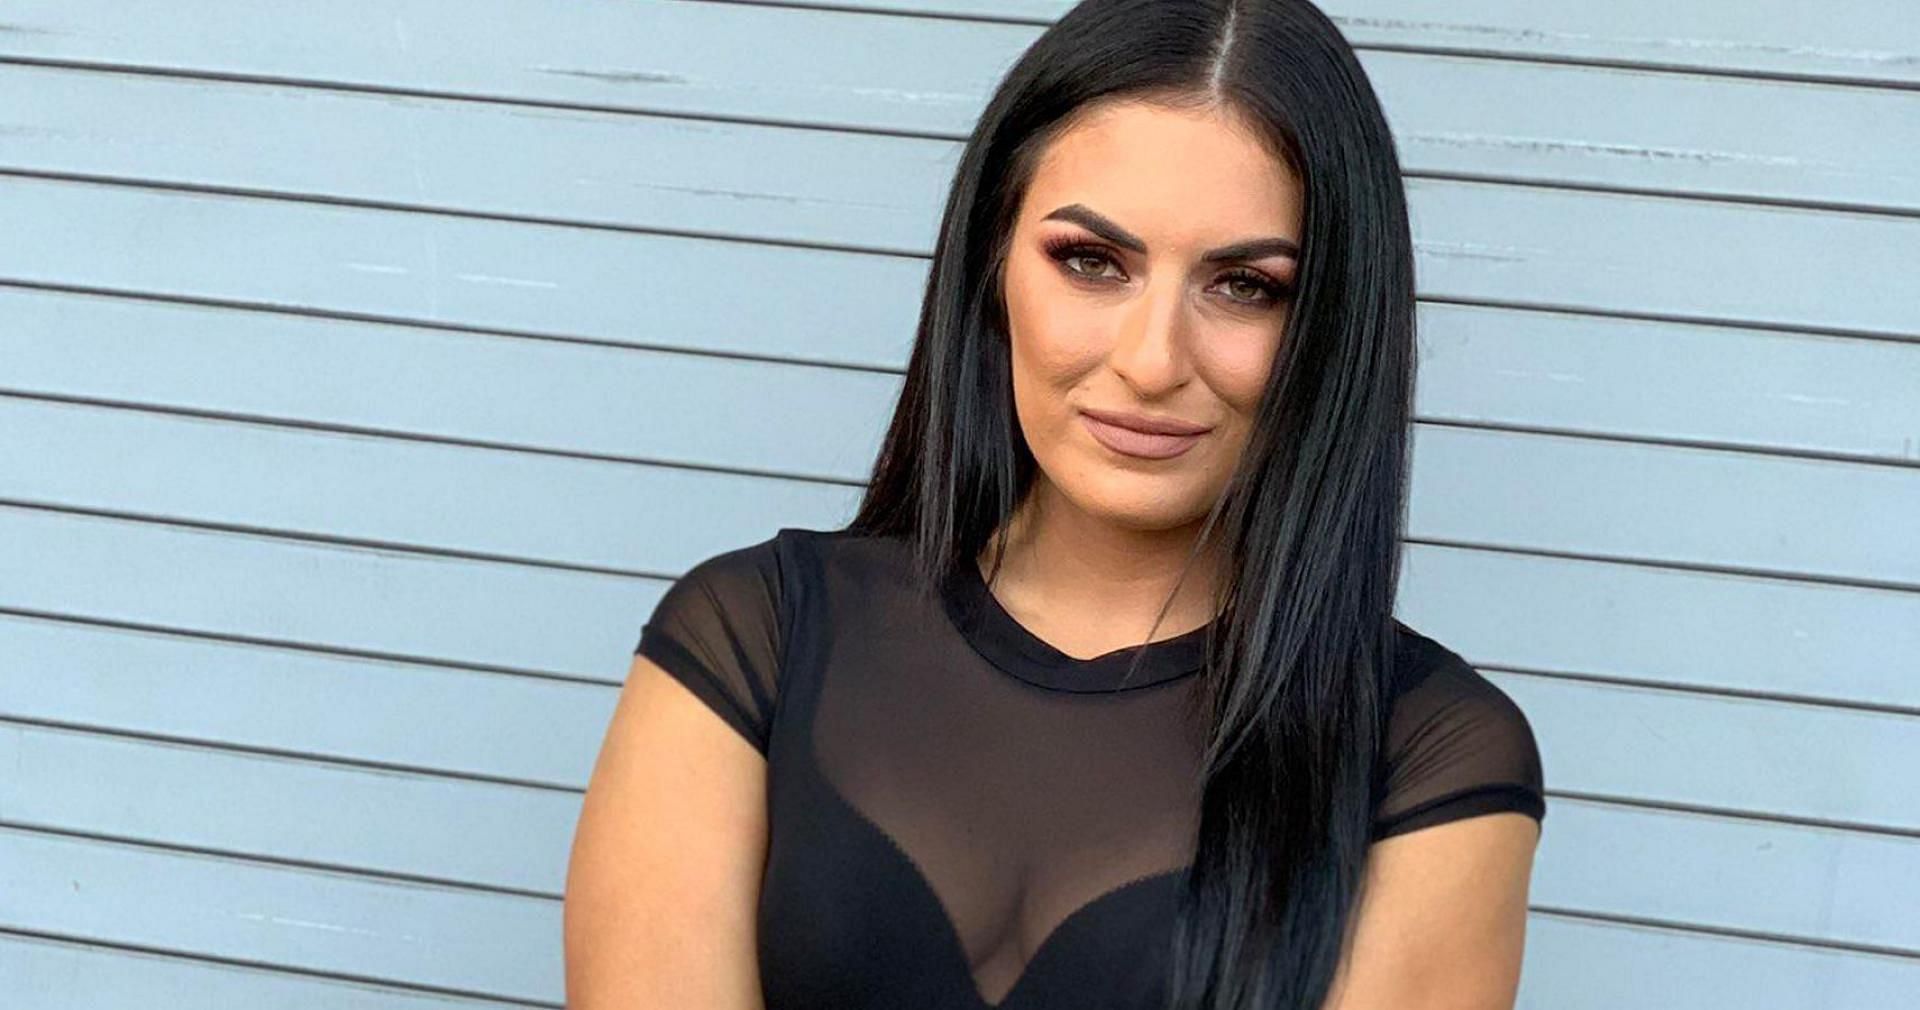 There were plans for Sonya Deville to compete at this year&#039;s women&#039;s Rumble match